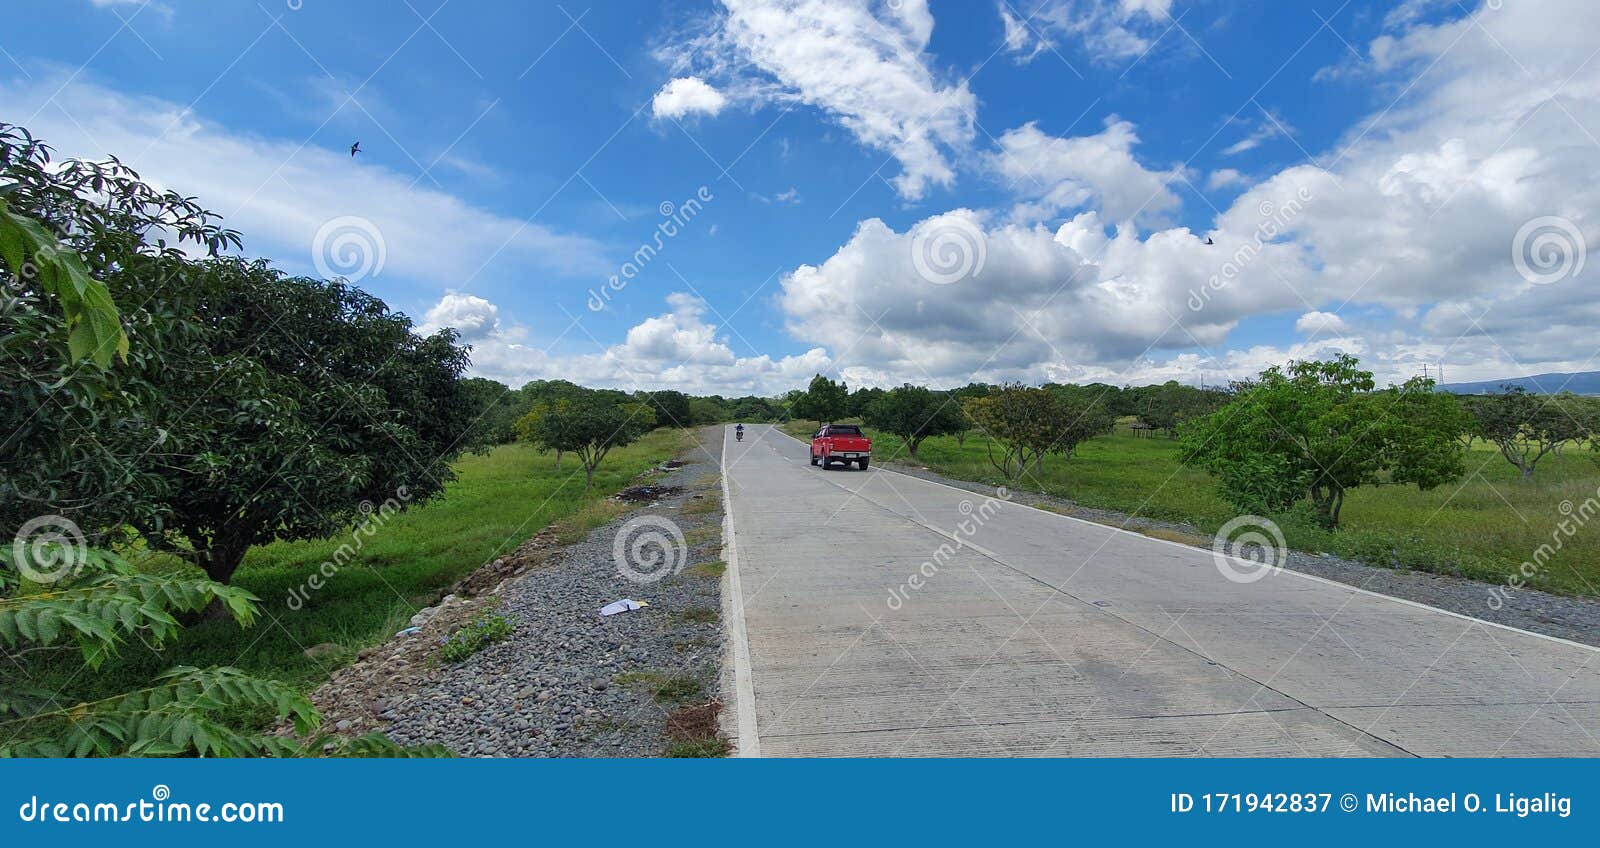 lonely road in digos city, davao del sur in the philippines